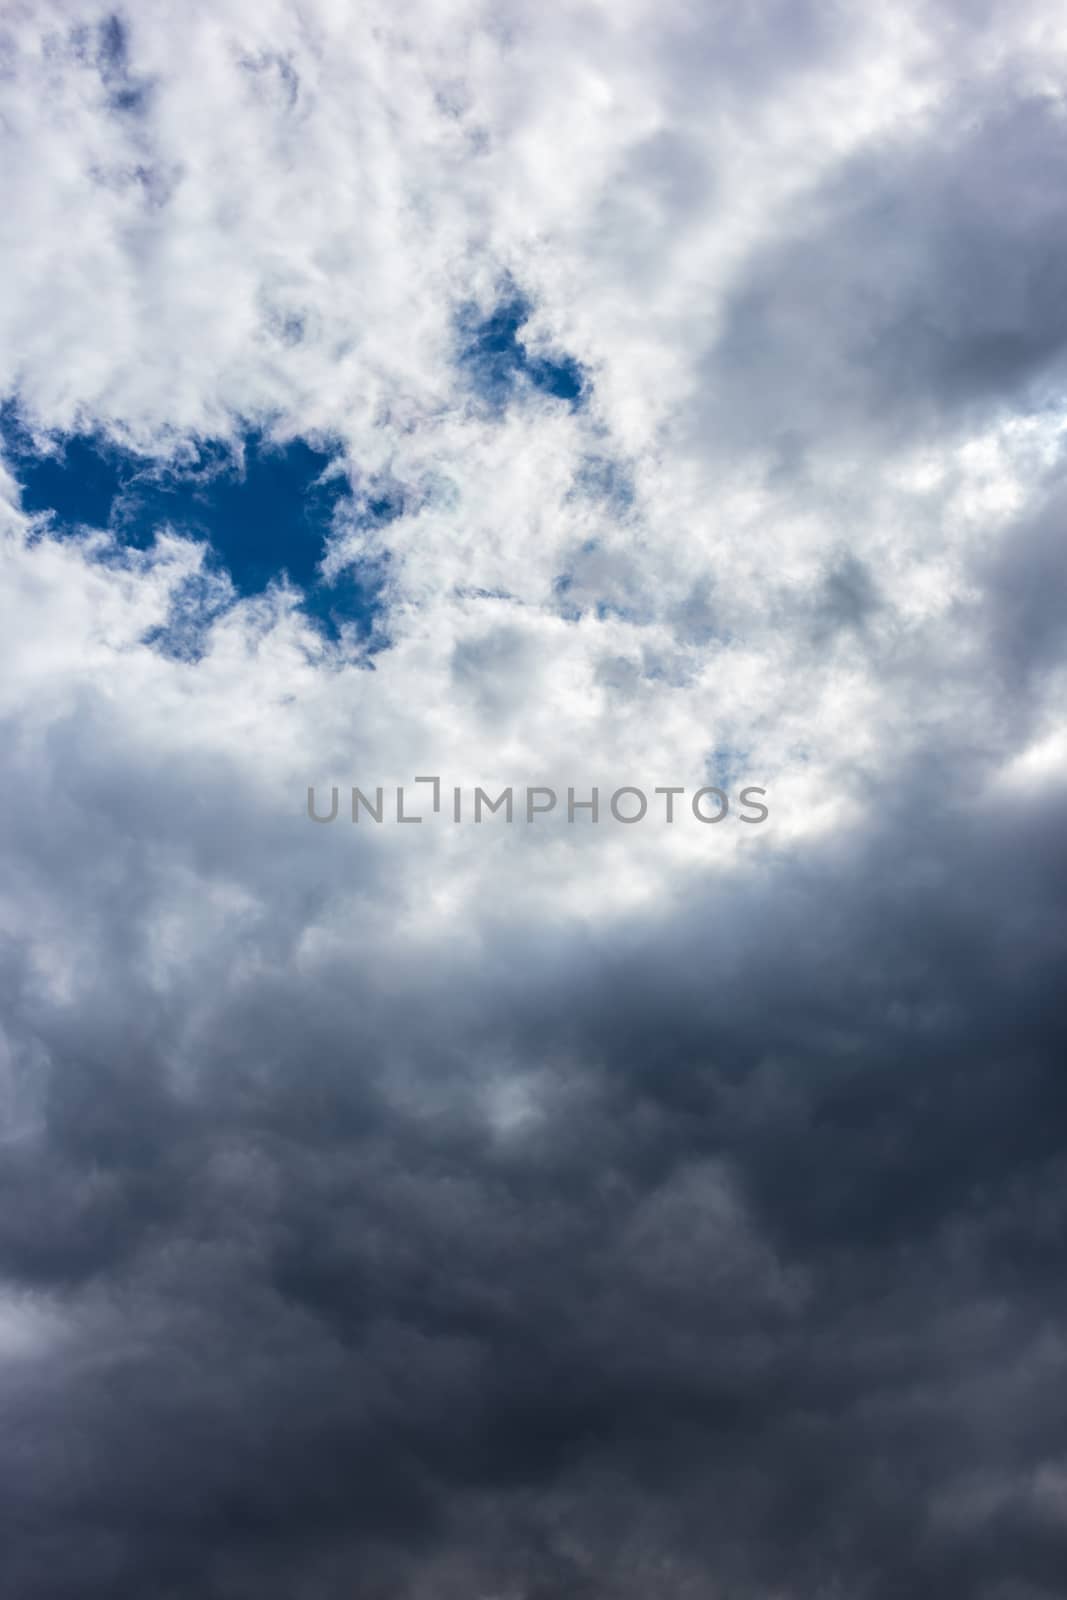 Abstract background, blue sky with clouds close-up